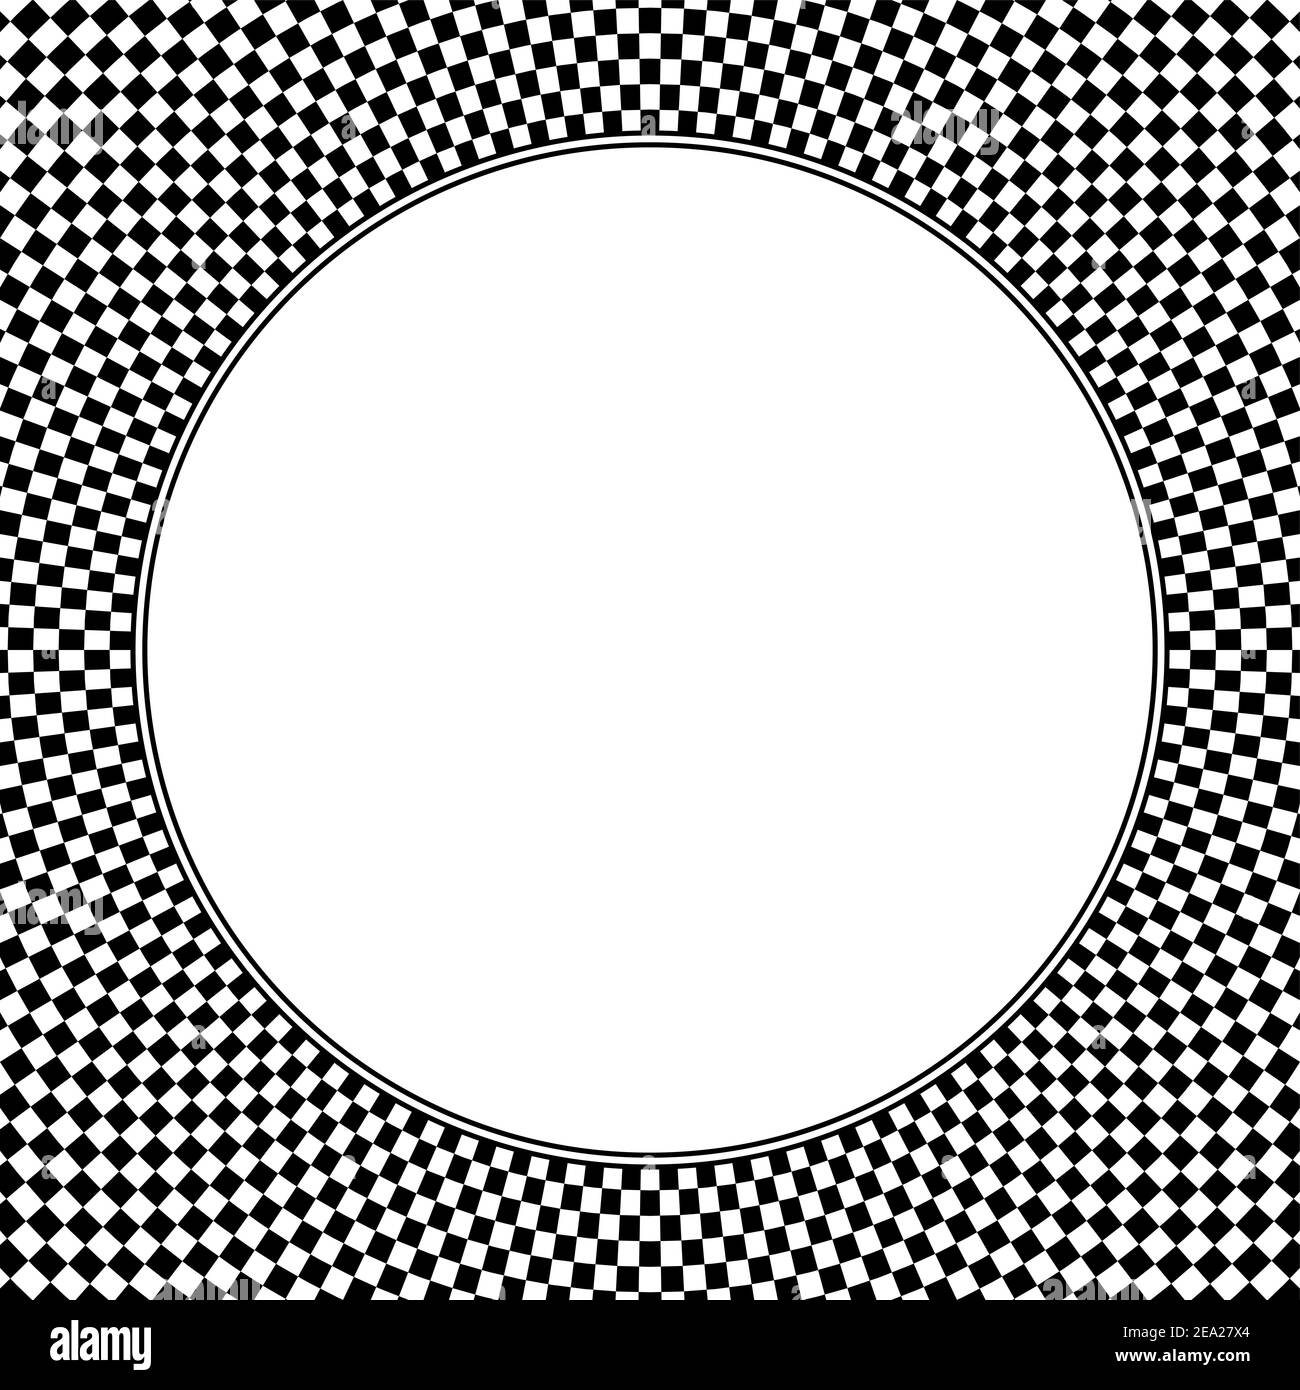 Square shaped checkerboard pattern background, with blank white circle in the middle. Checkered pattern texture, made of black and white squares. Stock Photo